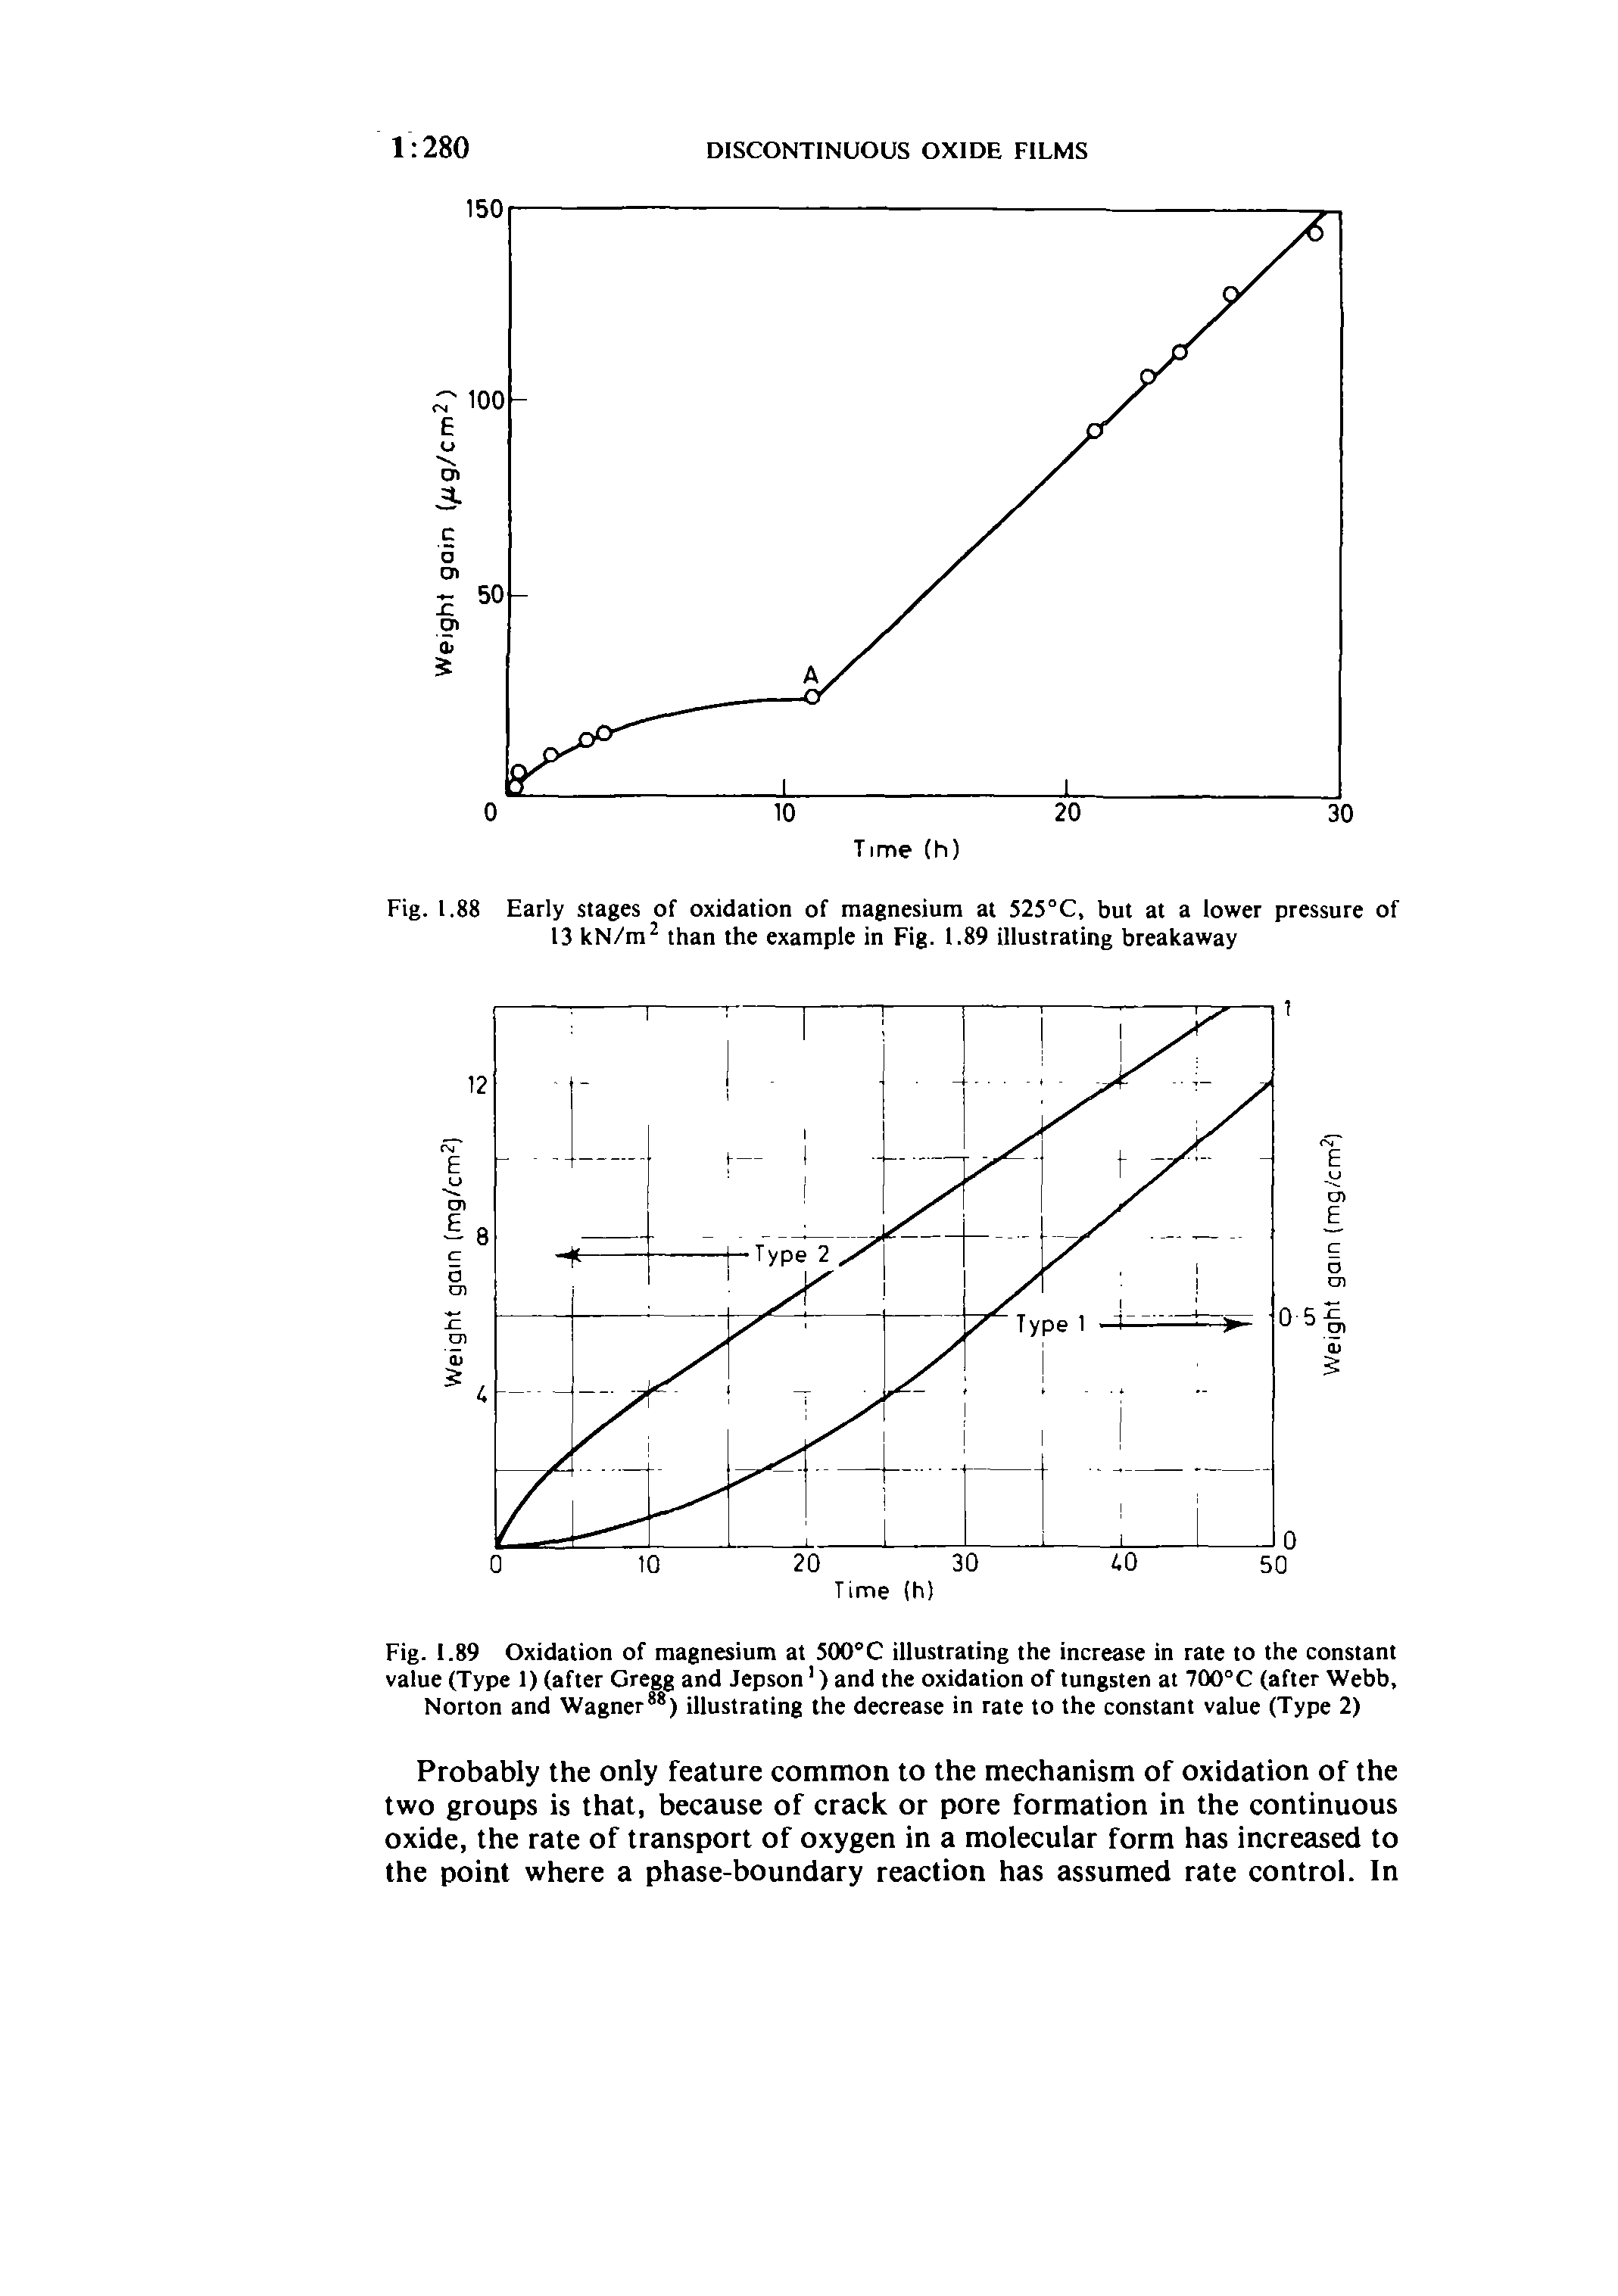 Fig. 1.89 Oxidation of magnesium at 500°C illustrating the increase in rate to the constant value (Type 1) (after Gregg and Jepson ) and the oxidation of tungsten at 700°C (after Webb, Norton and Wagner ) illustrating the decrease in rate to the constant value (Type 2)...